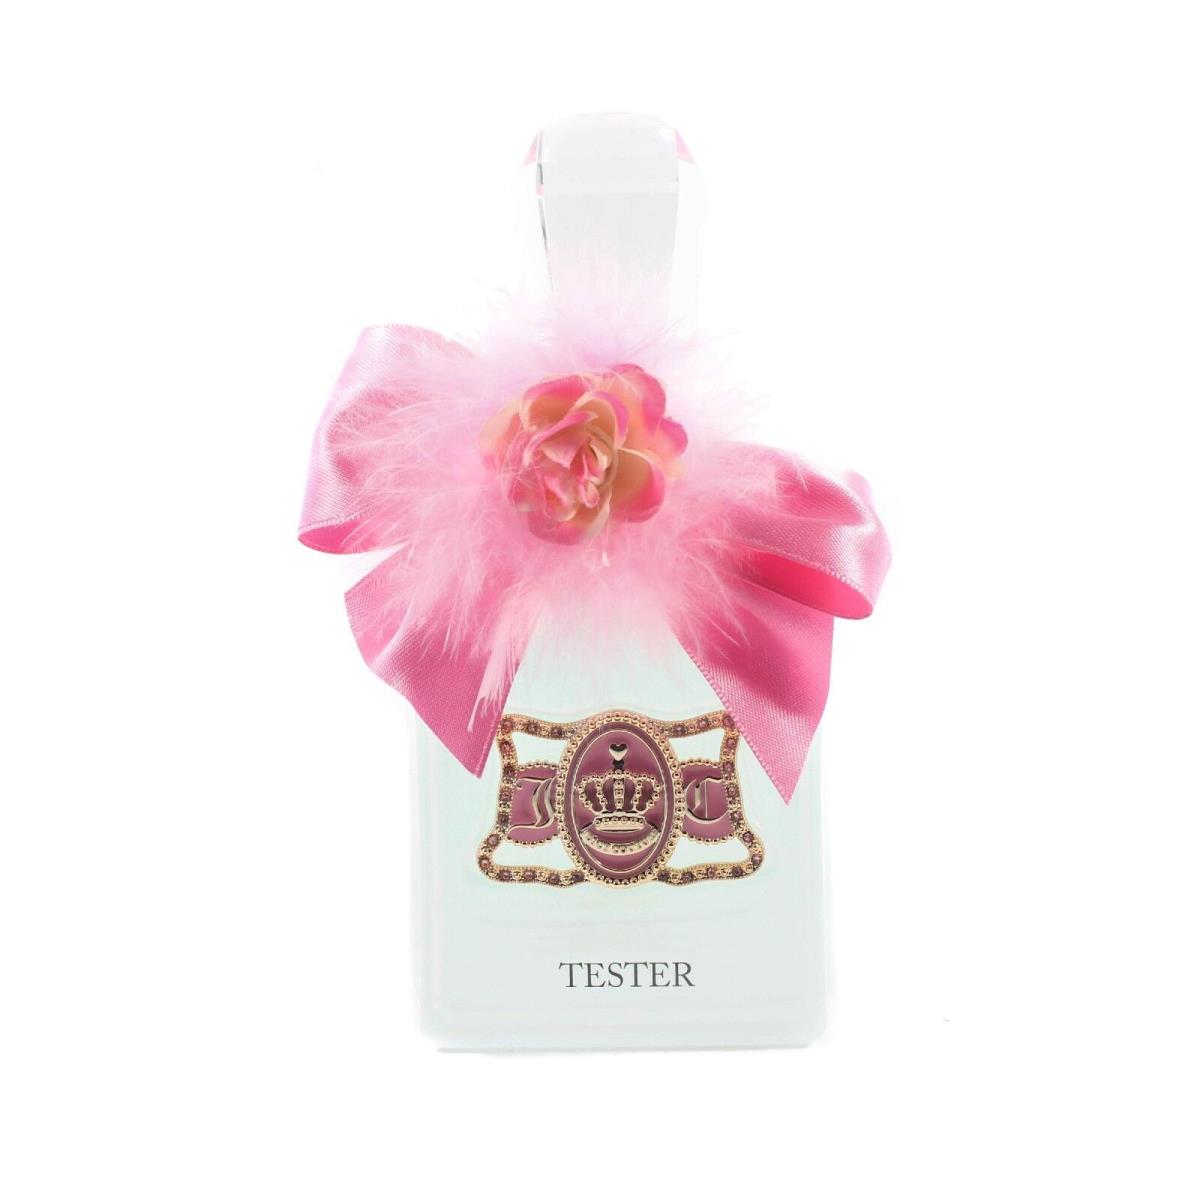 Viva La Juicy Glace By Juicy Couture Edp Spray 3.4/3.3 oz Same As Picture